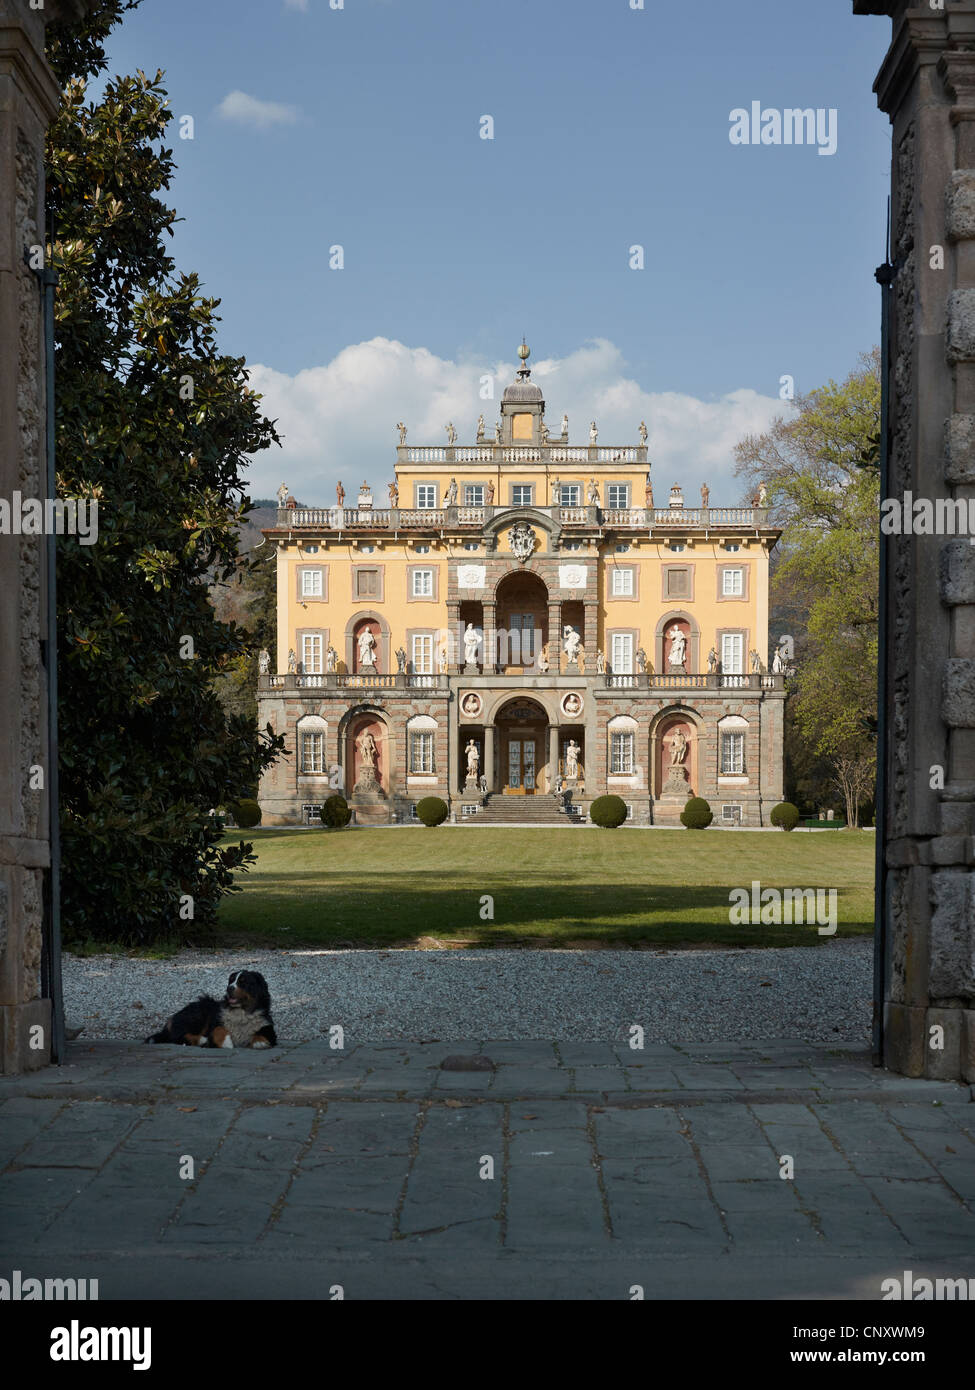 Villa Torrigiani, near Lucca, Italy. Remodelled in 17th century by Maurizio Oddi in Mannerist style. Stock Photo